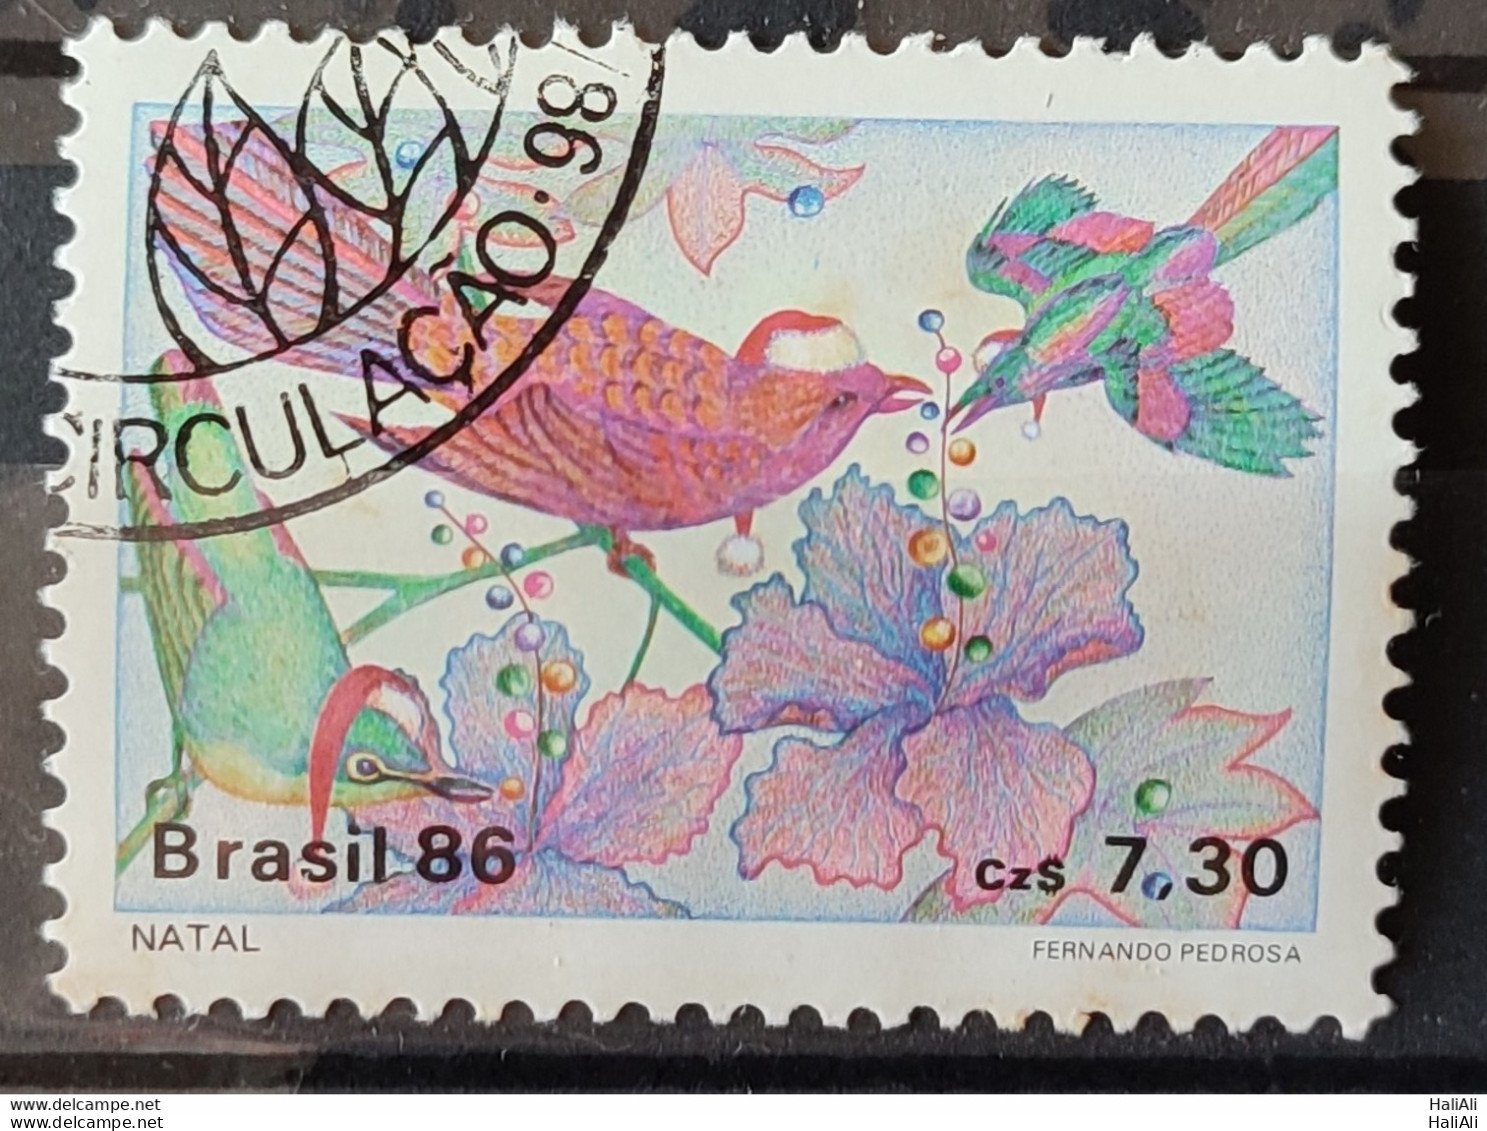 C 1532 Brazil Stamp Christmas Religion Birds 1986 Circulated 4.jpg - Used Stamps